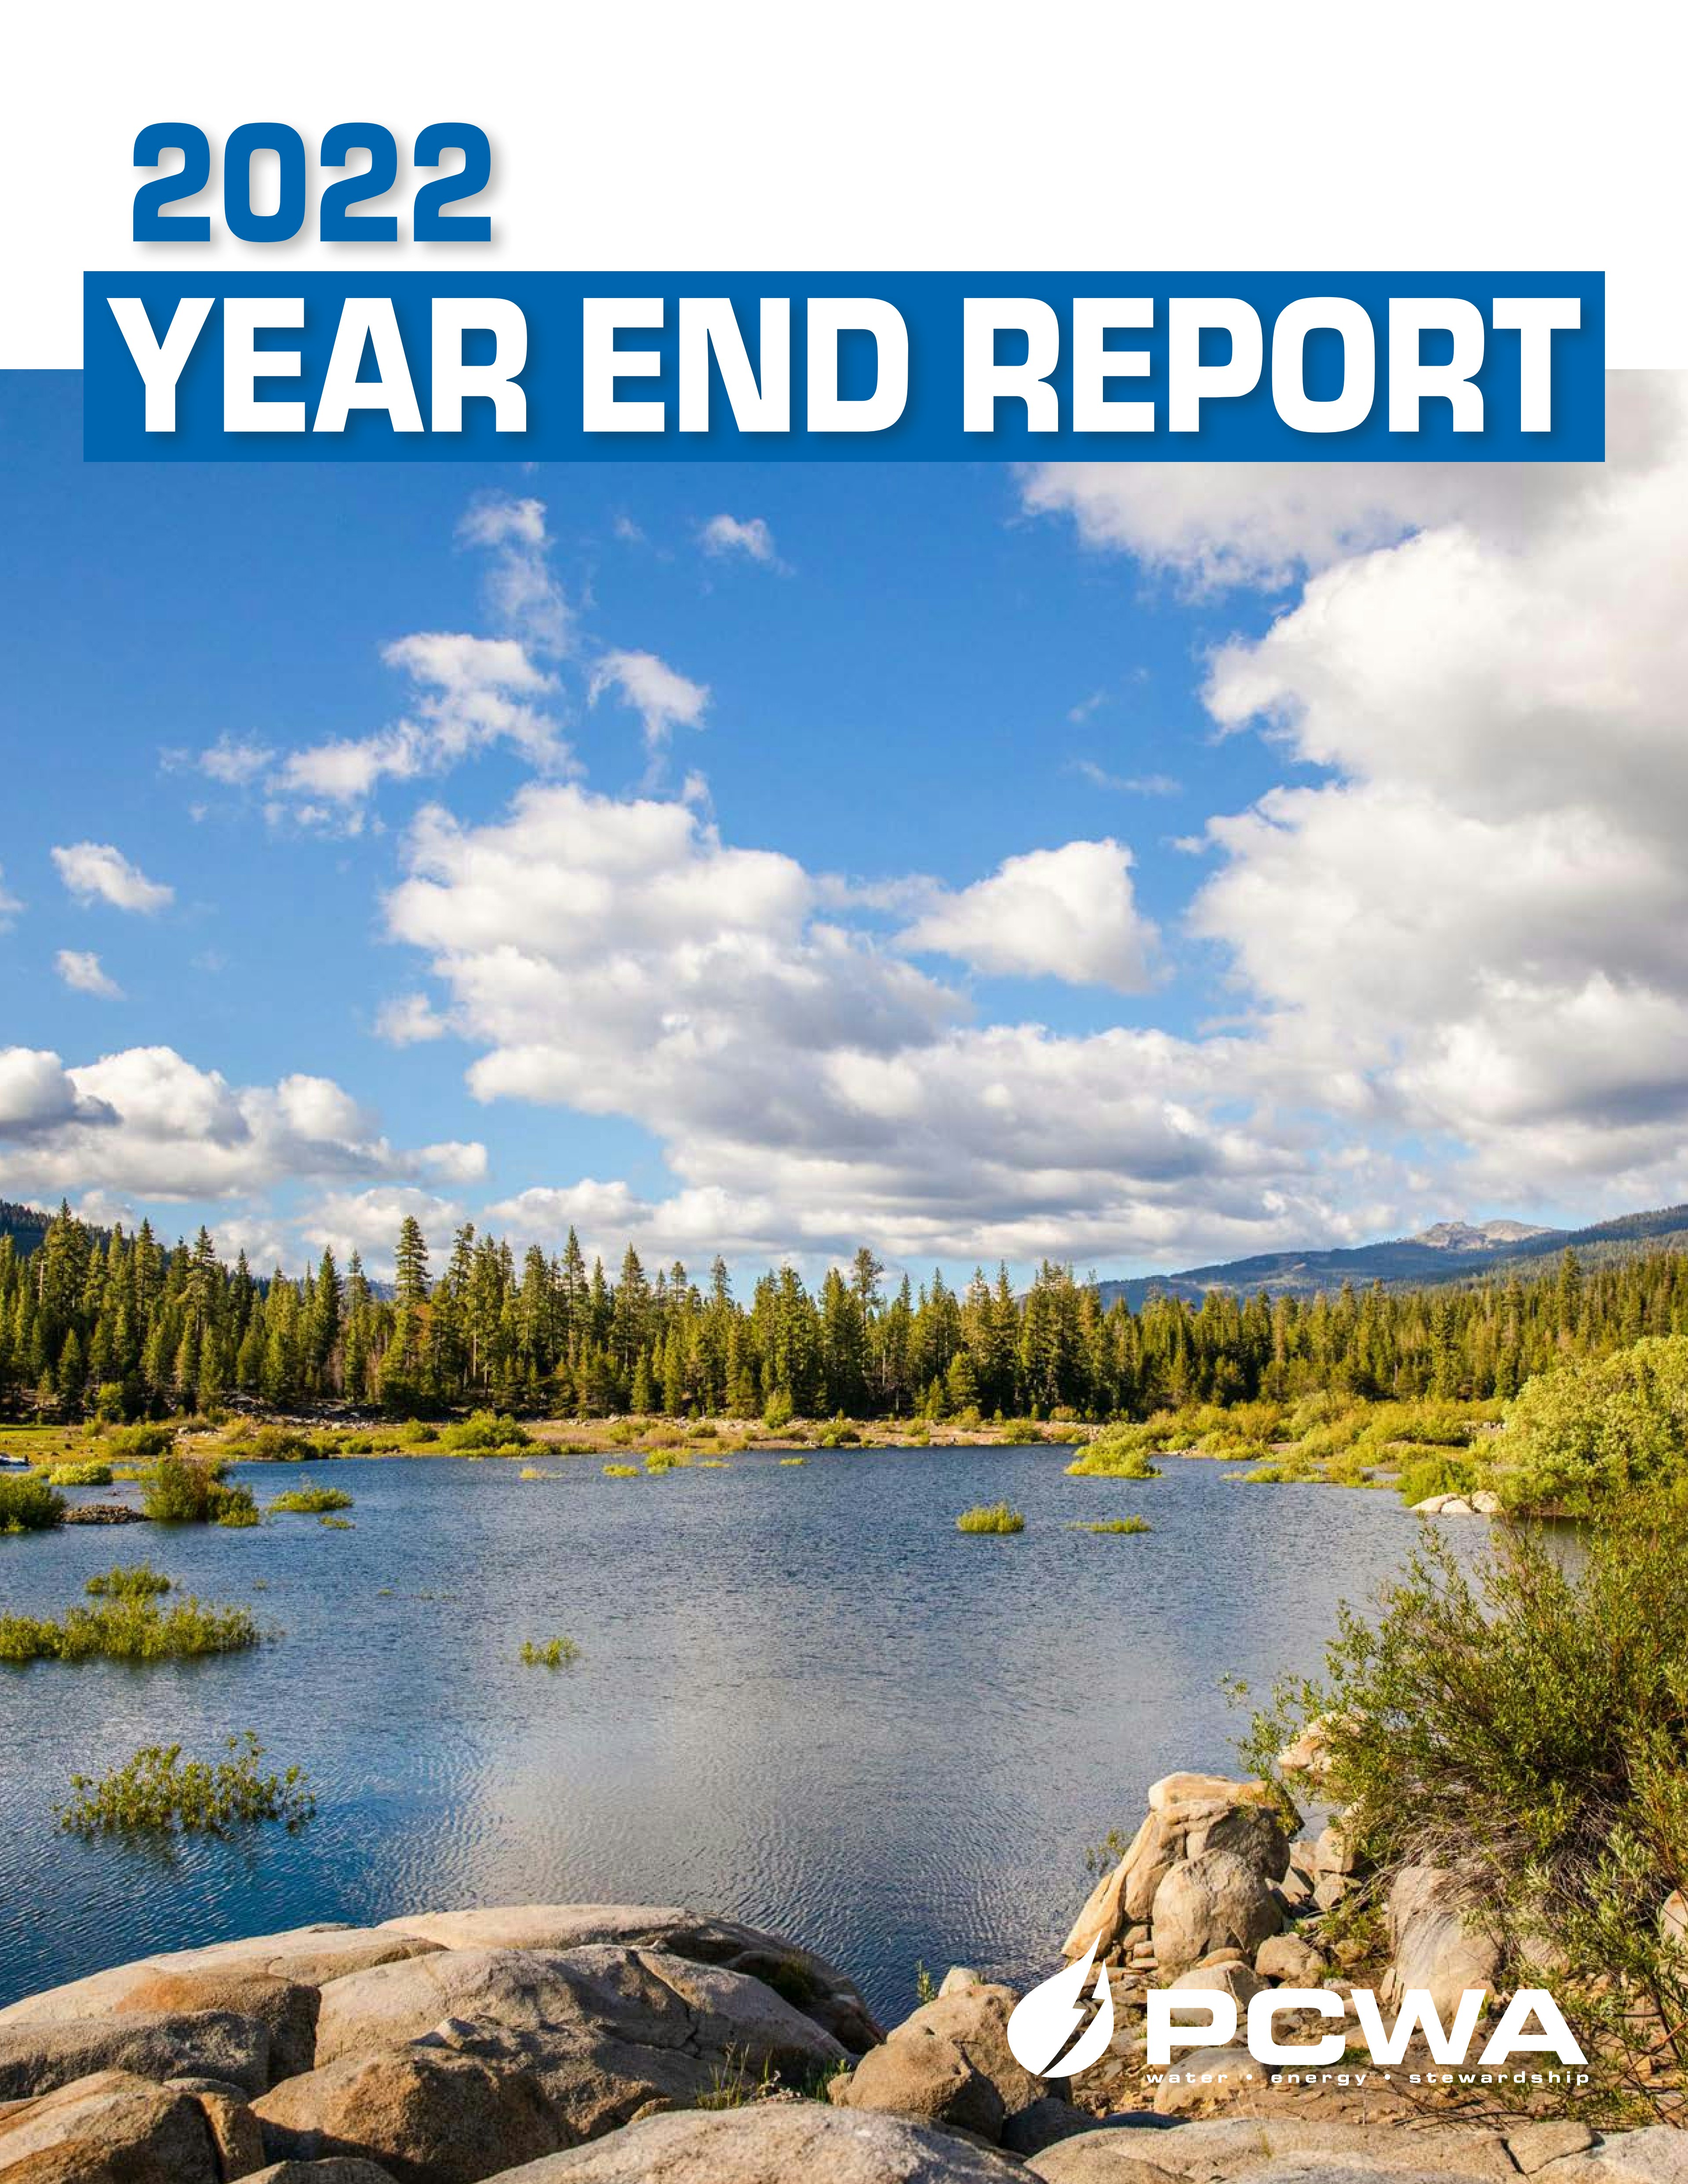 Thumbnail image and link for 2022 Year End Report publication